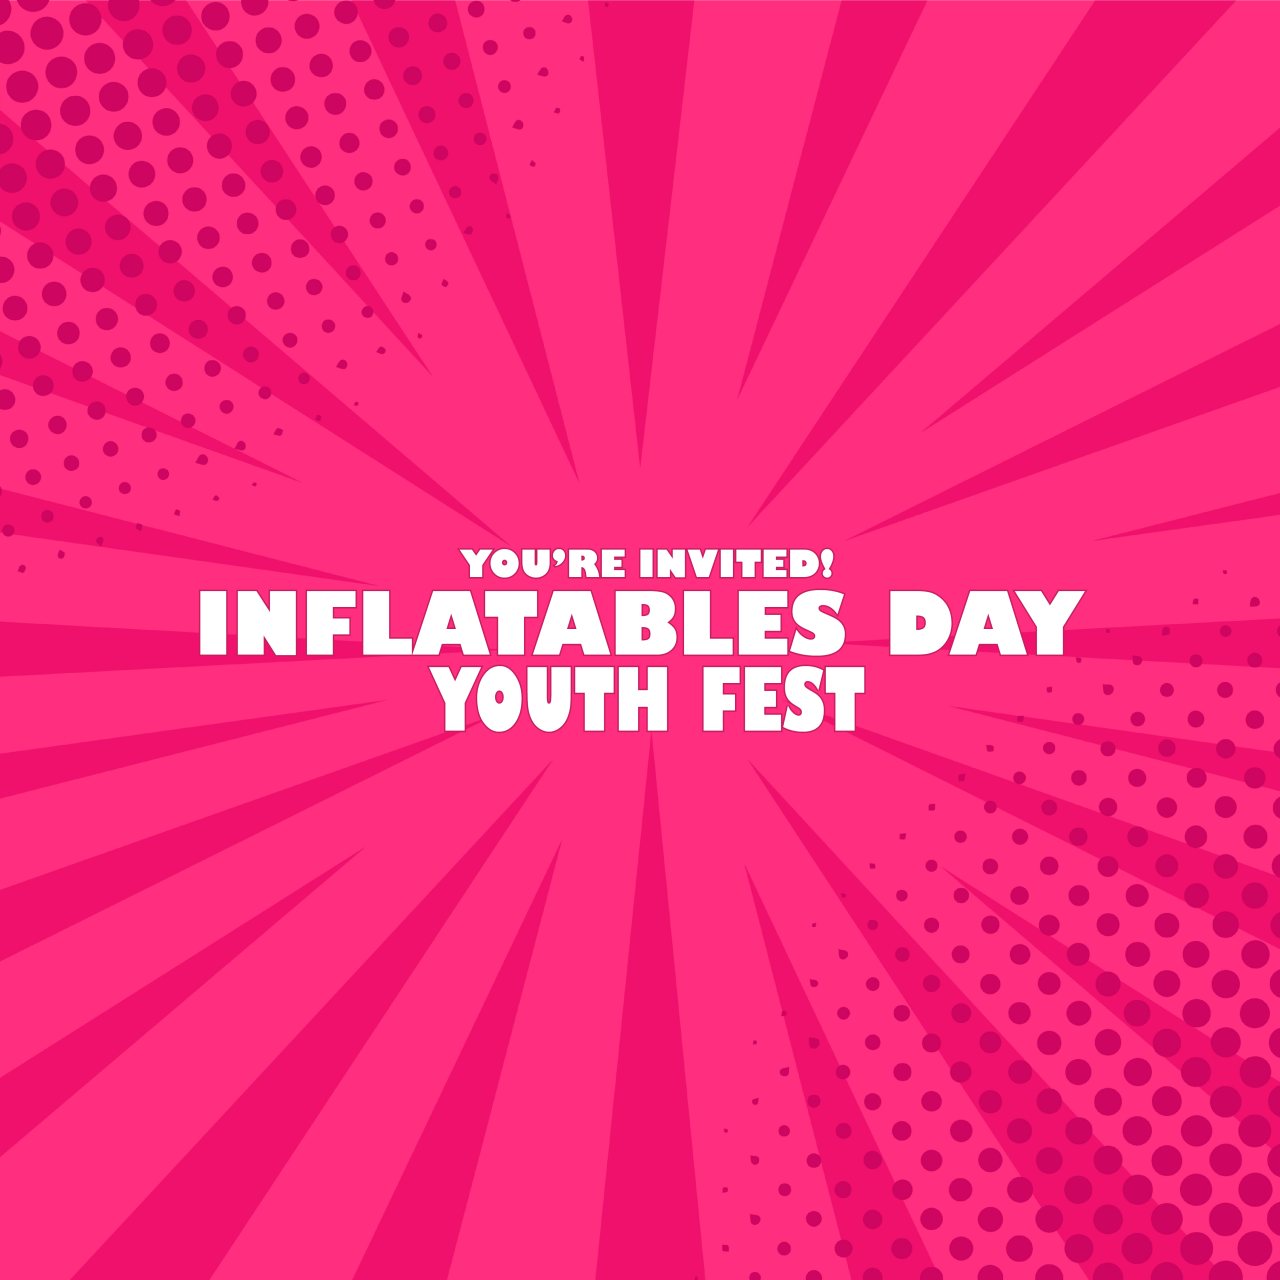 Inflatables Day Youth Fest